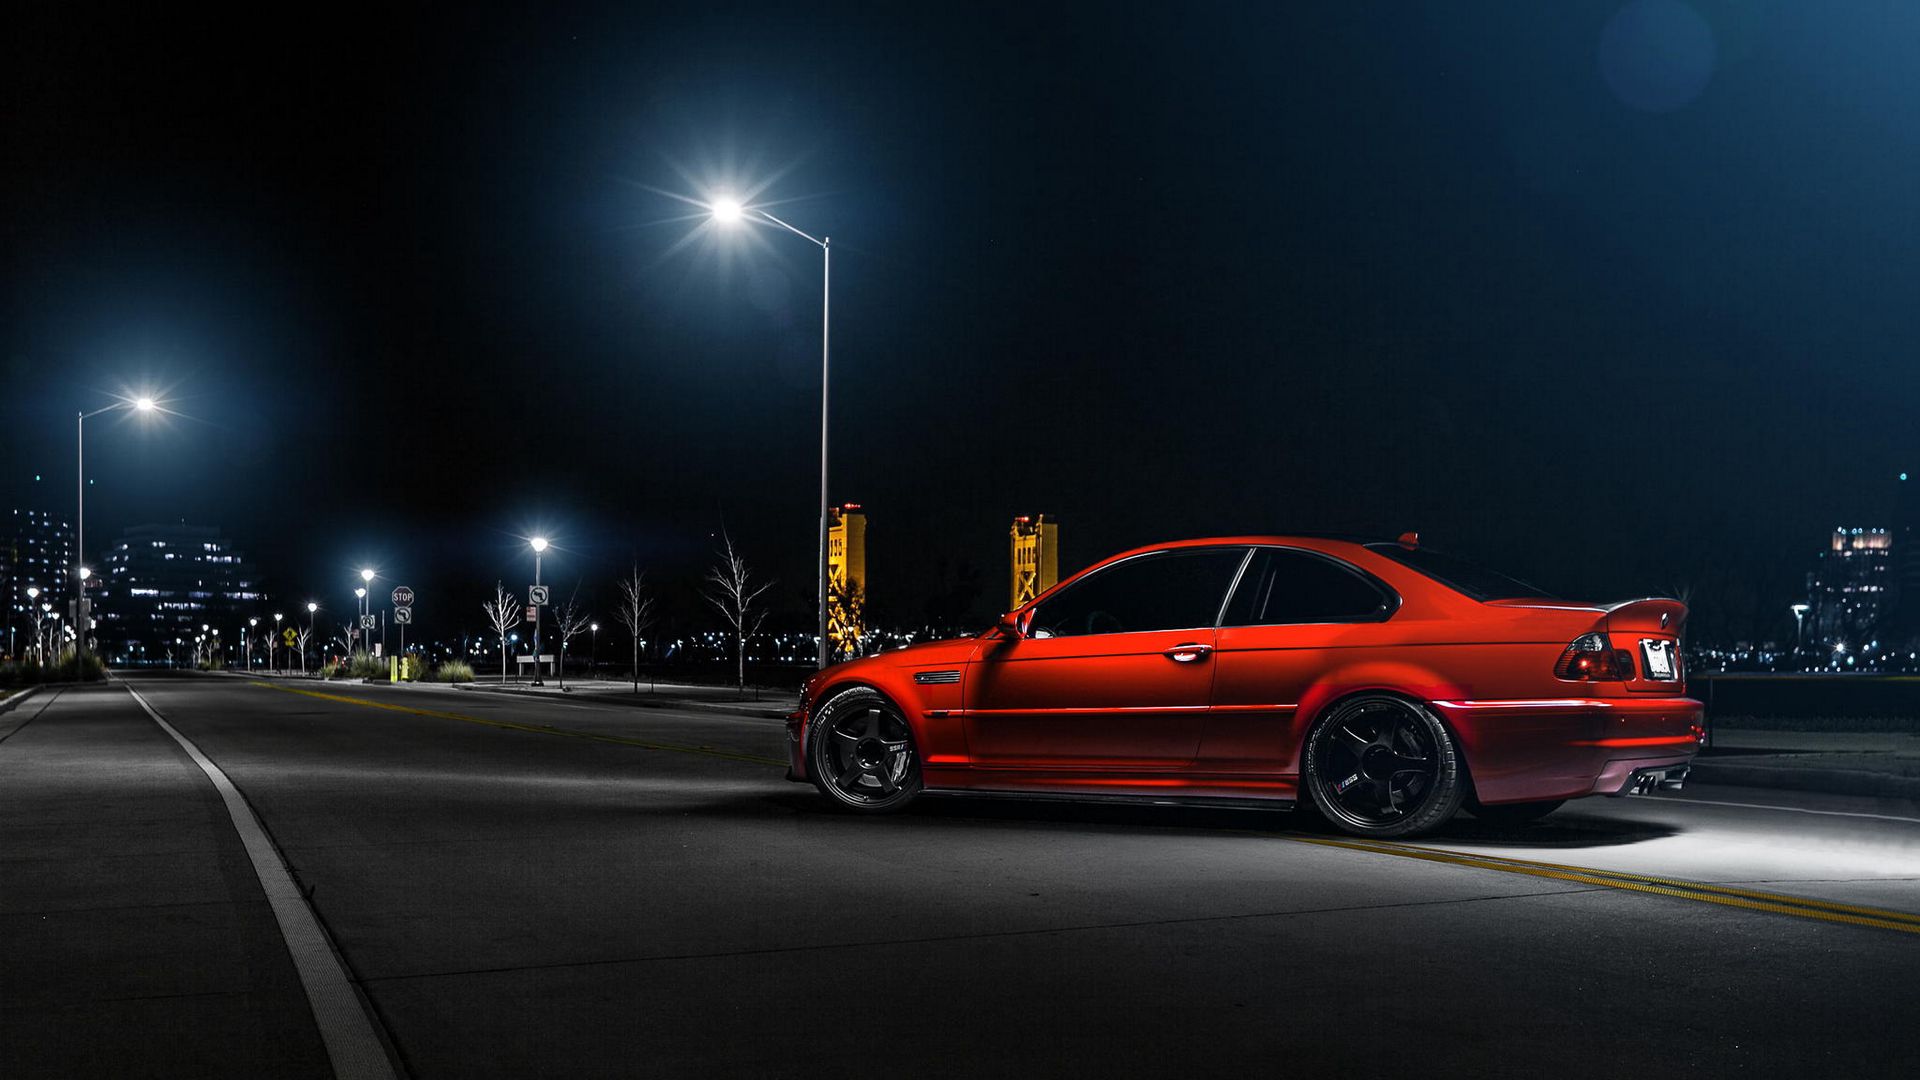 Download Wallpaper 1920x1080 Bmw M3 E46 Car Red Side View Night